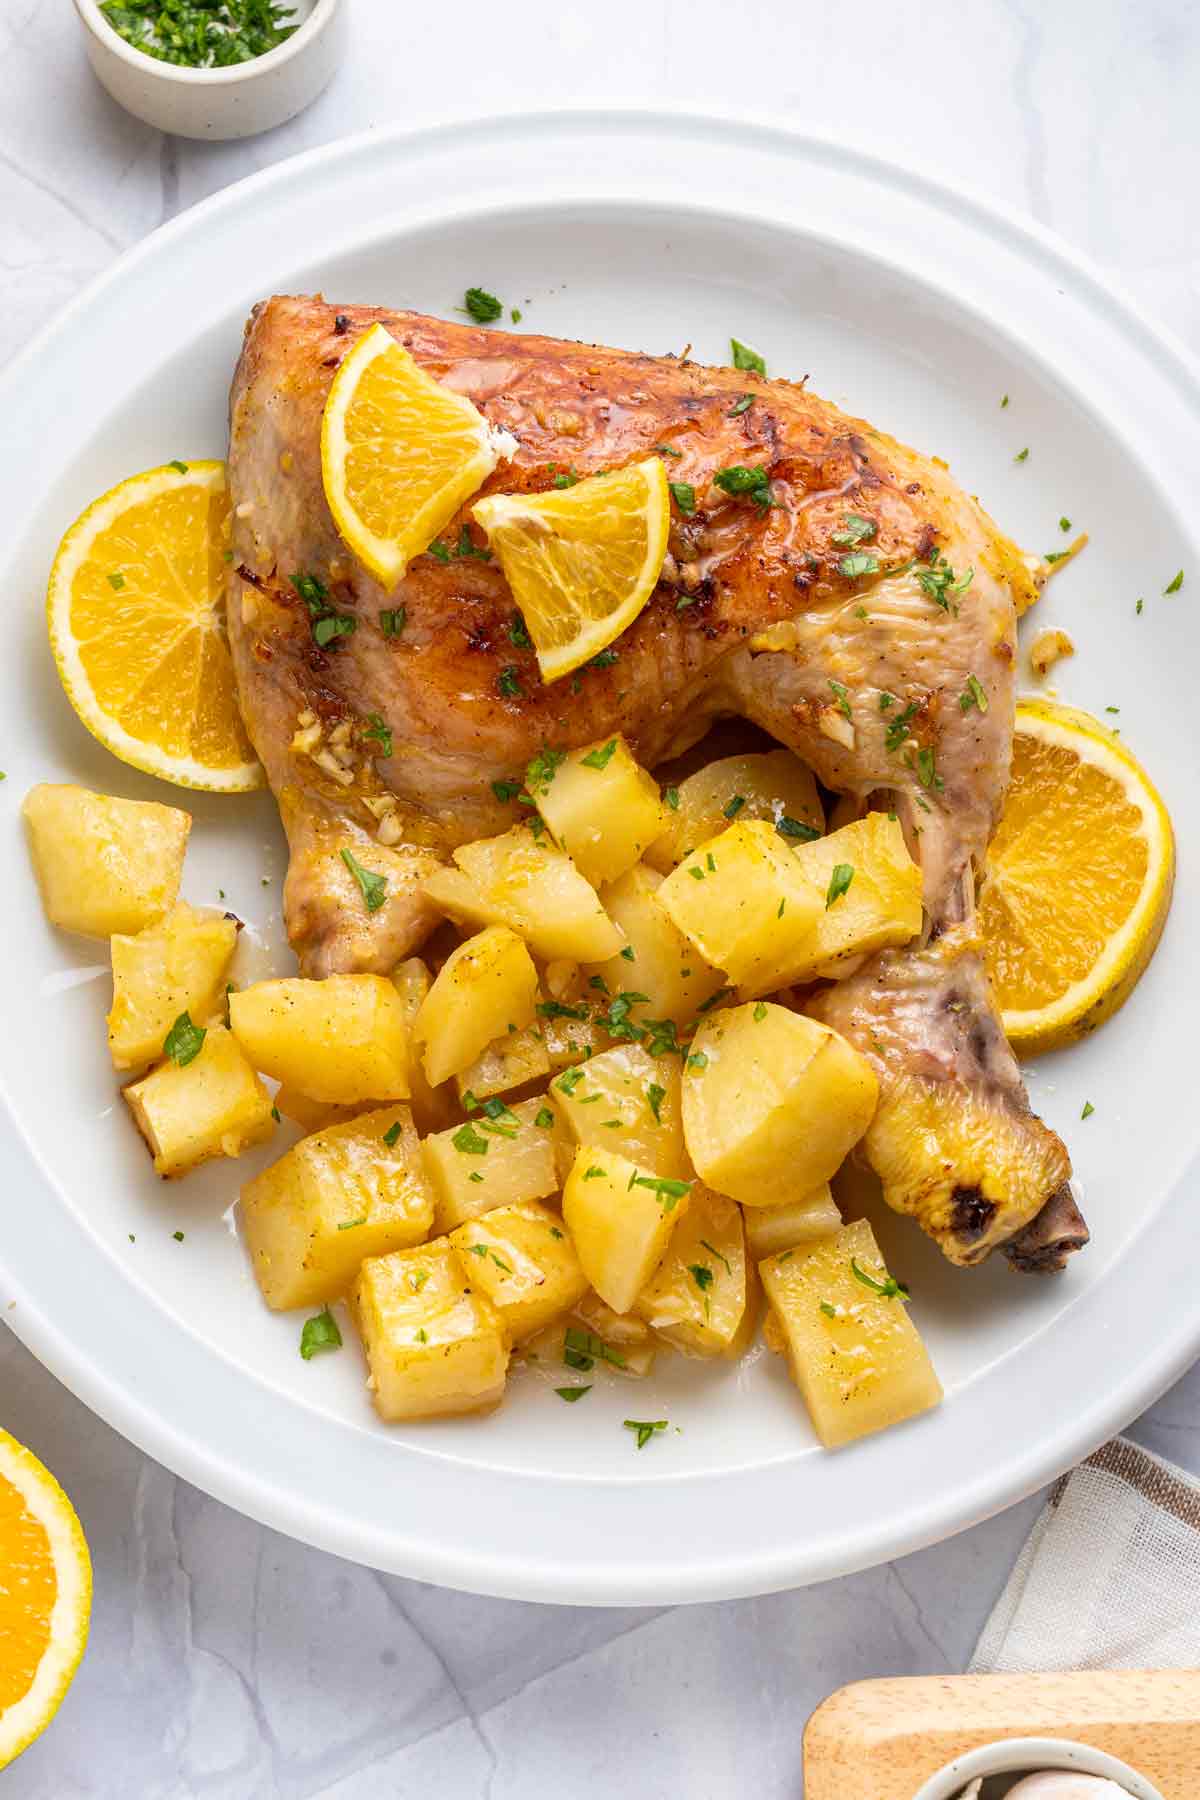 Roasted Chicken Quarters and Potatoes